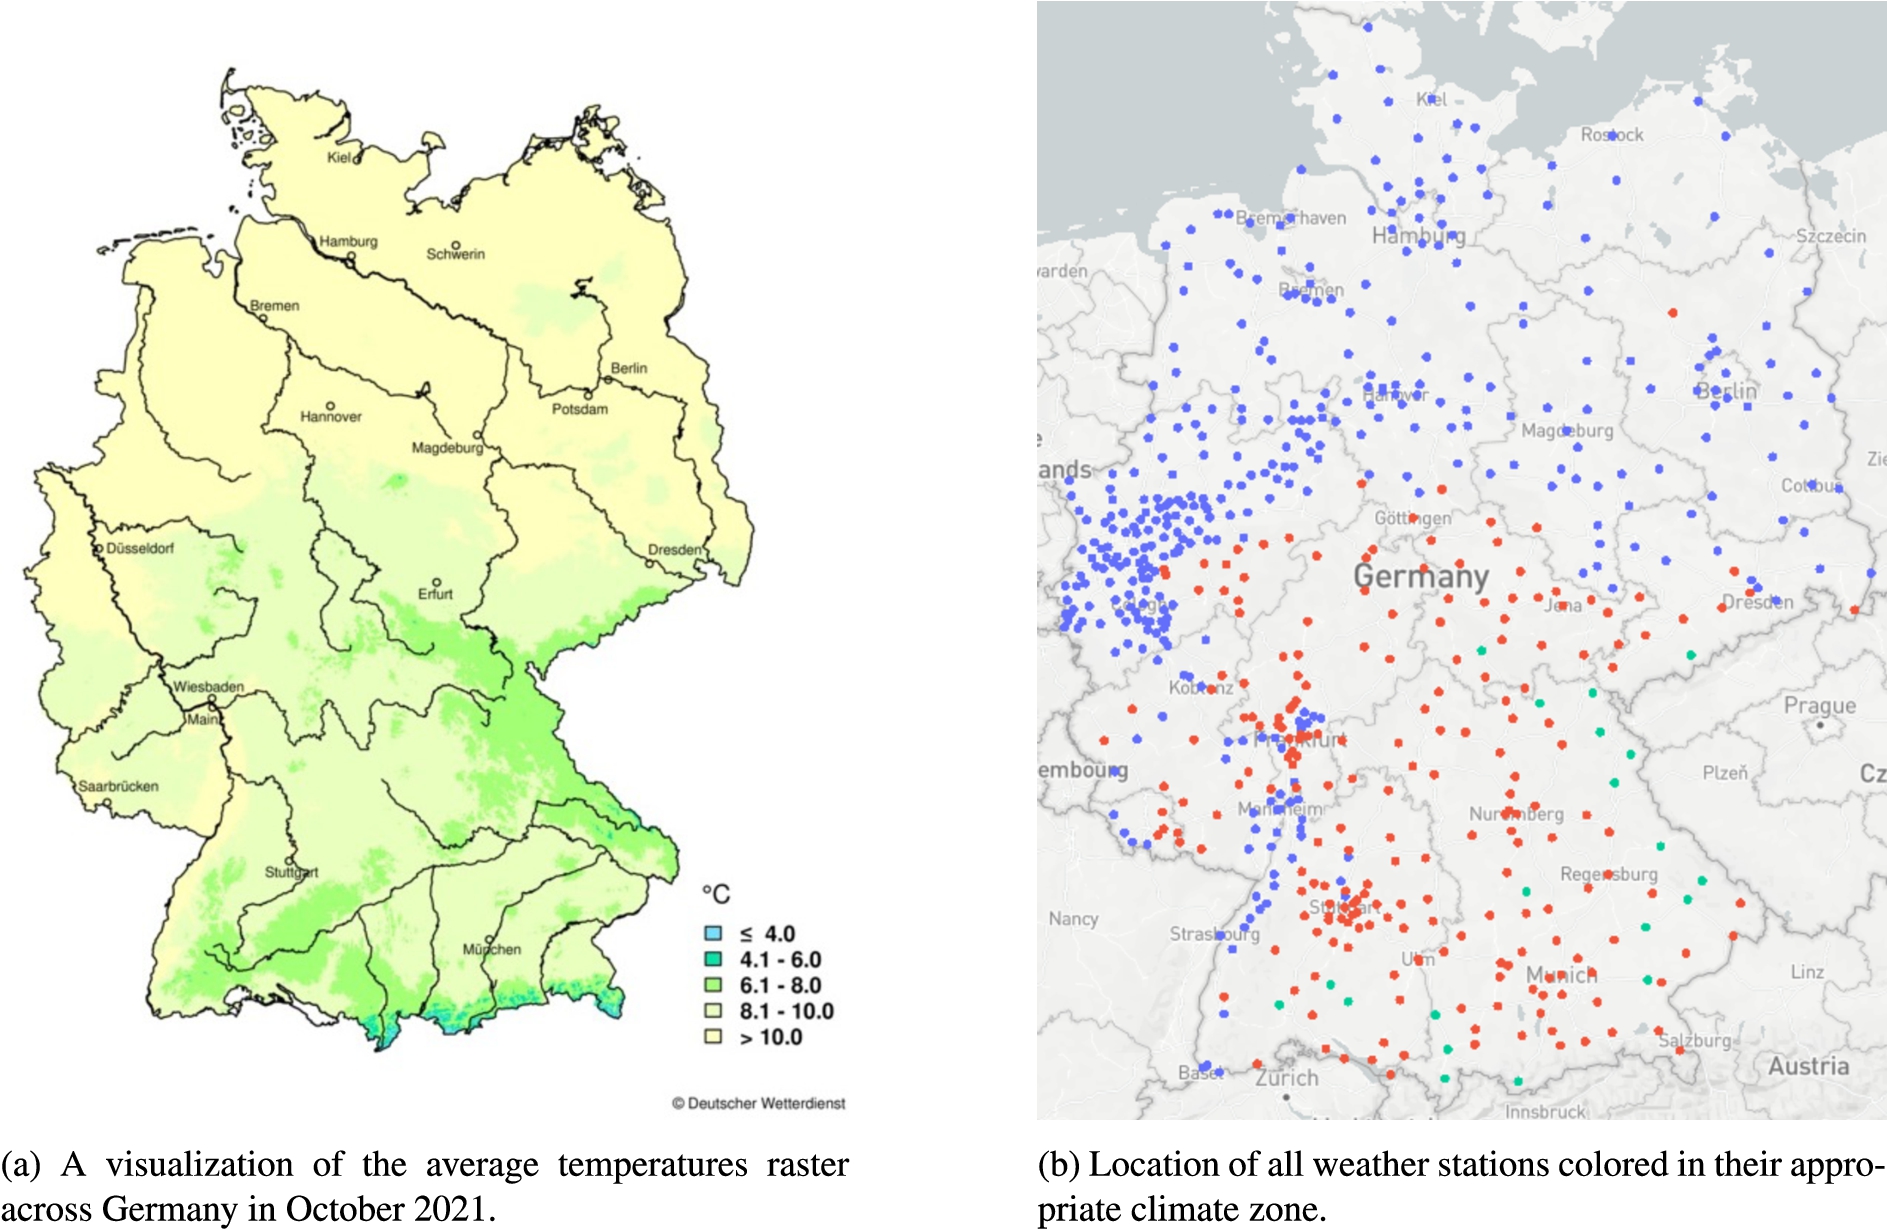 Reference data provided by the DWD, shows that weather stations should be divided into three climate zones.